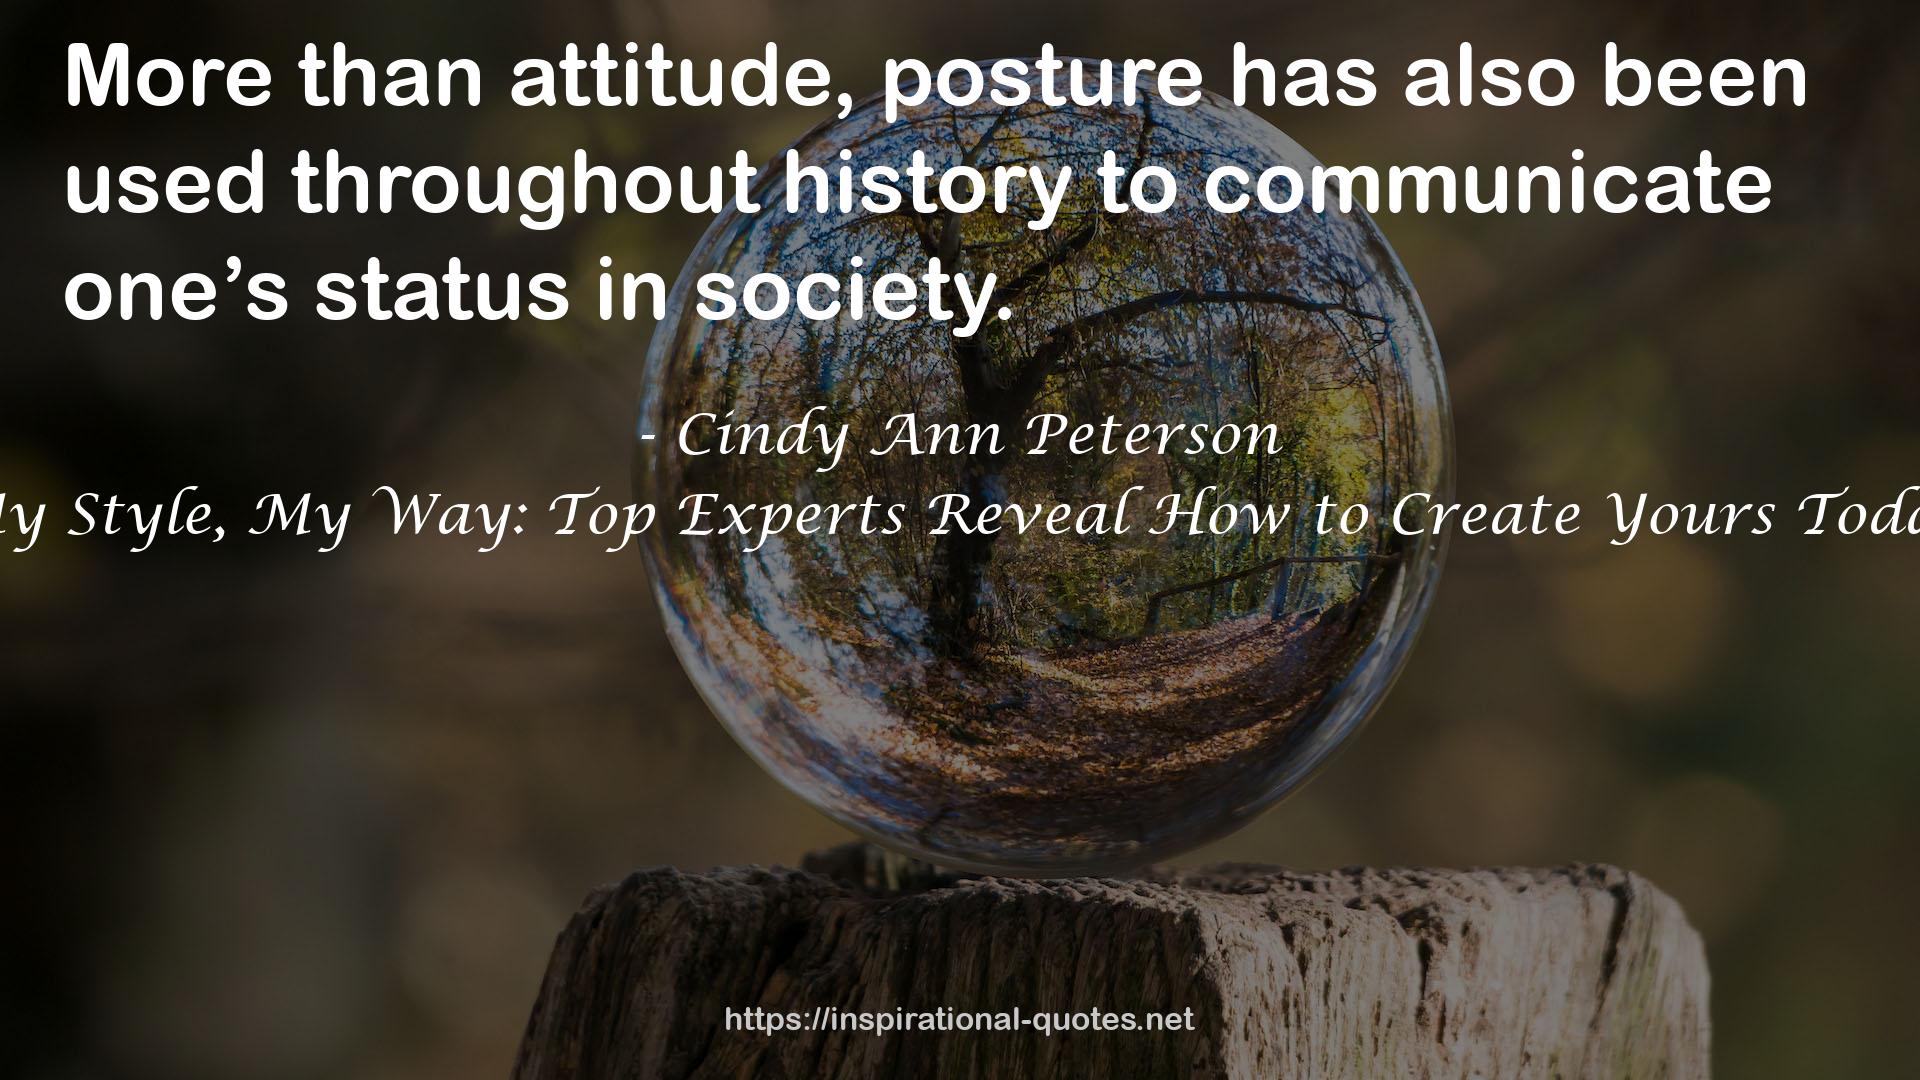 Cindy Ann Peterson QUOTES